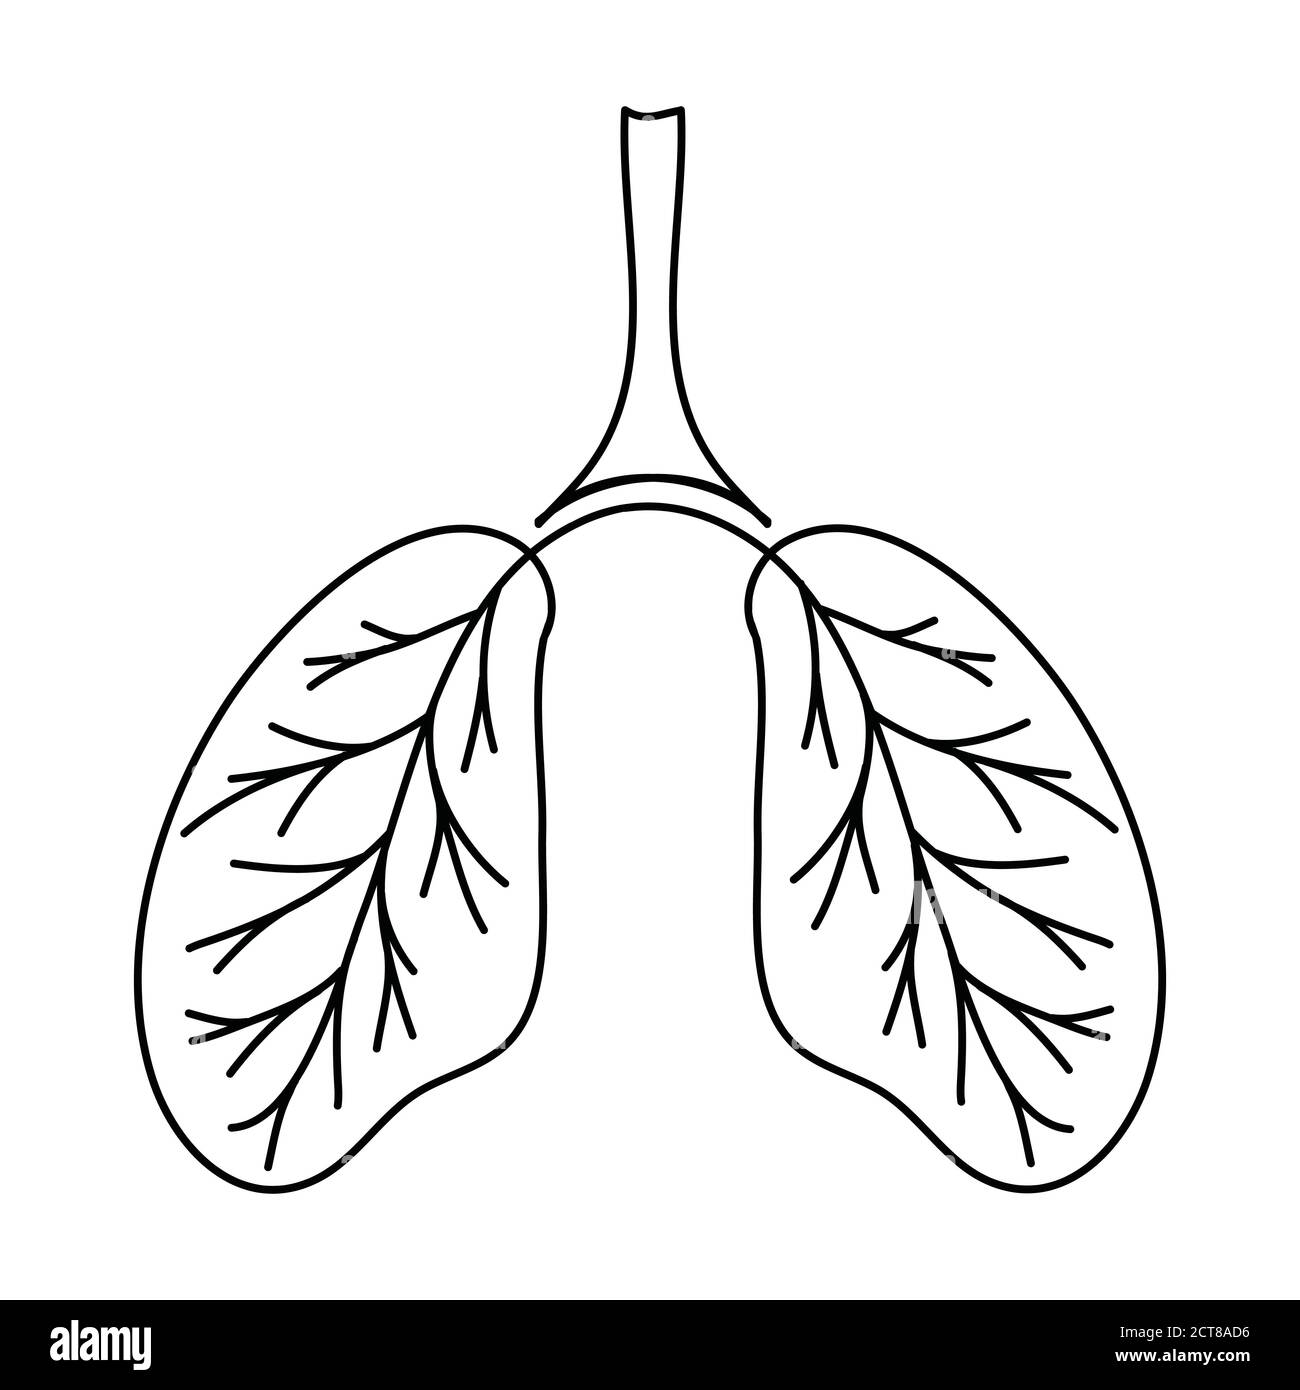 469 Lungs Sketch Stock Photos HighRes Pictures and Images  Getty Images